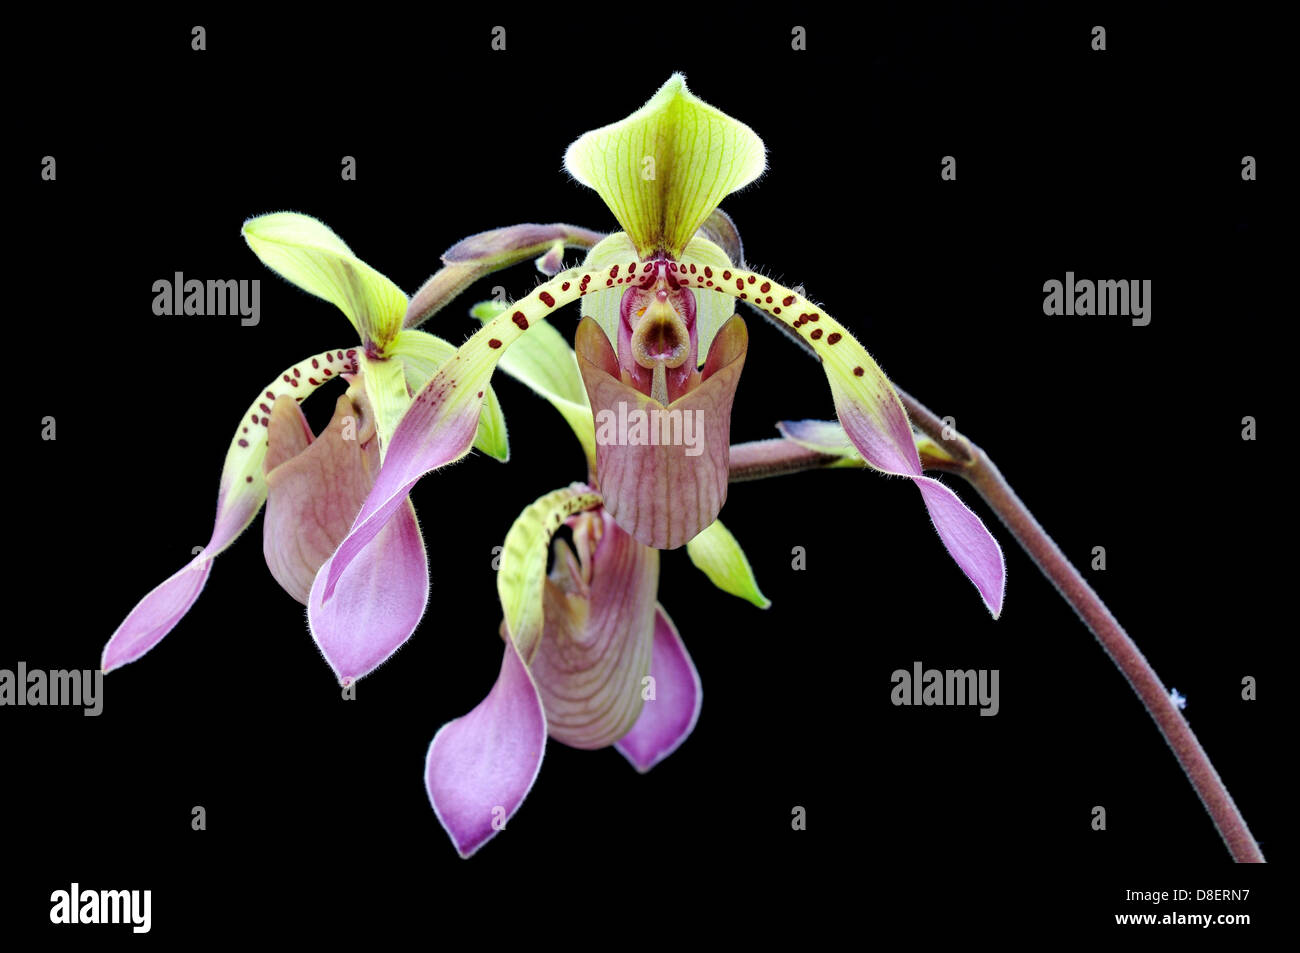 Lady's slipper orchid flowers Paphiopedilum lowii Stock Photo